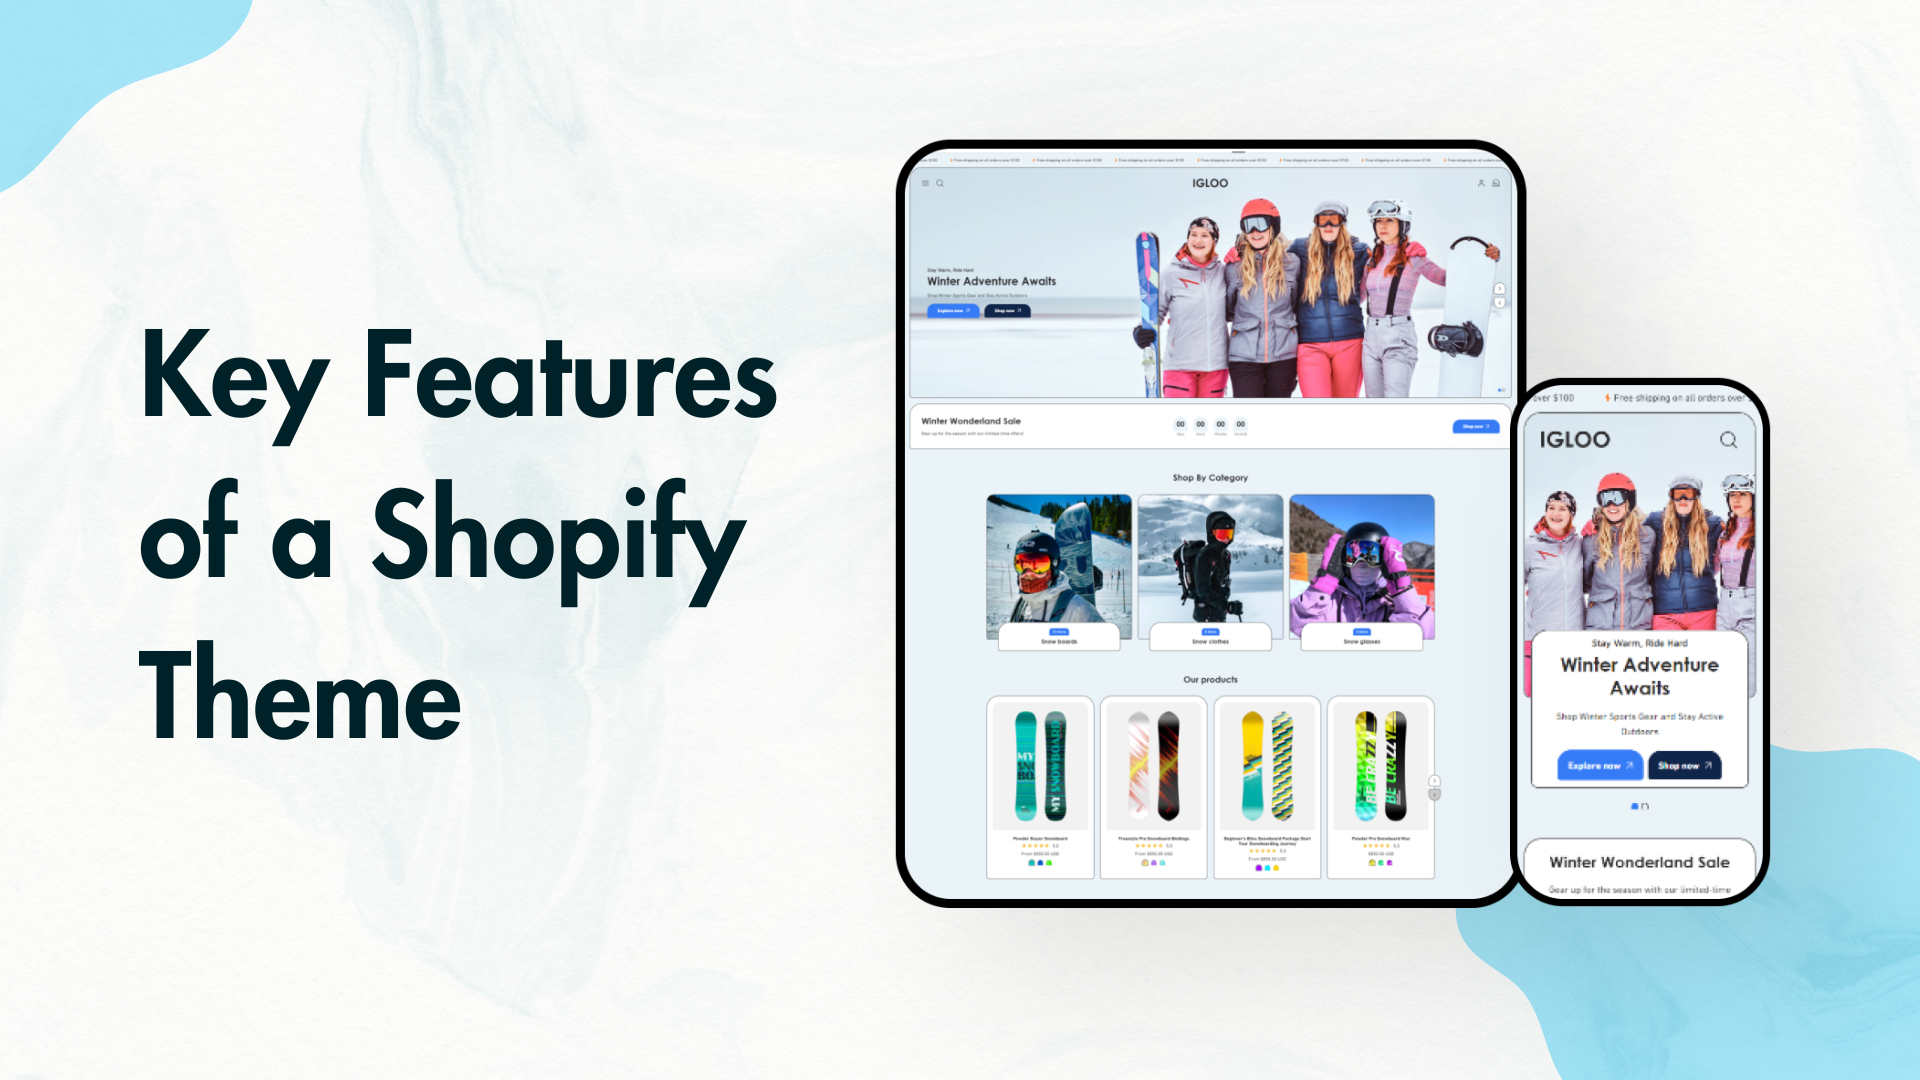 Key Features of a Shopify Theme